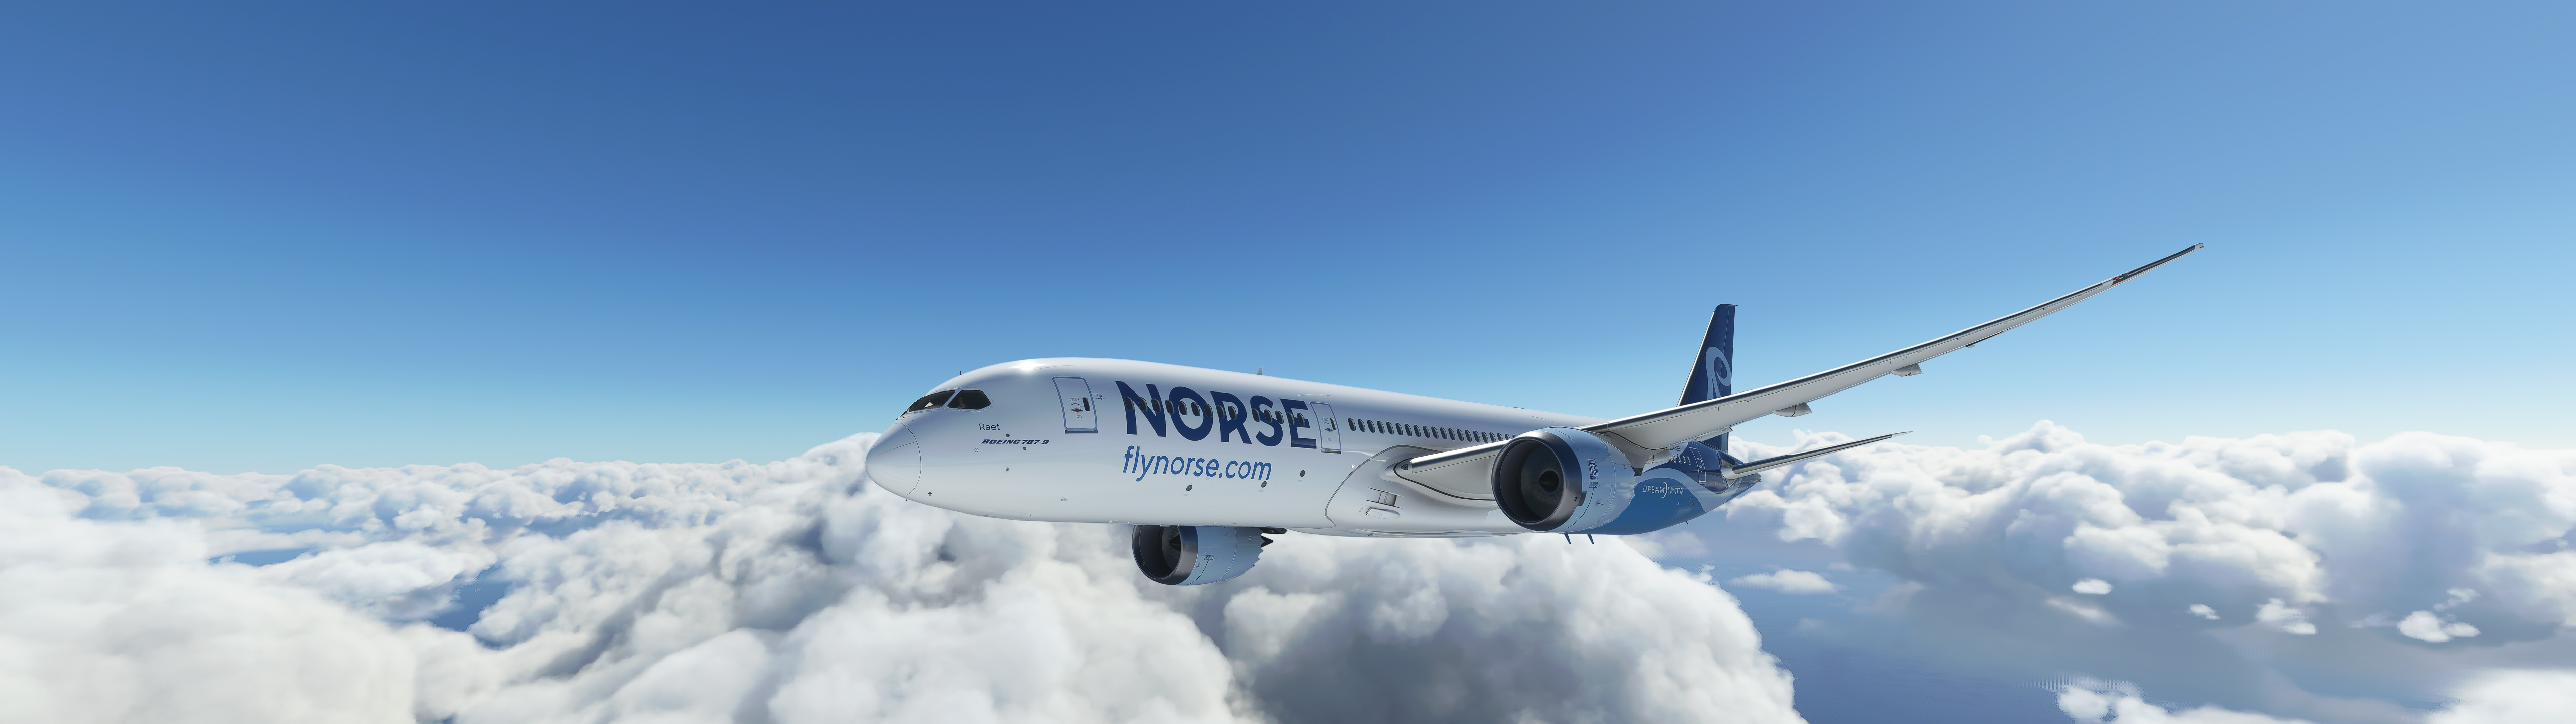 Norse Atlantic Airways selects Navitaire Airline Platform to power affordable transatlantic flights